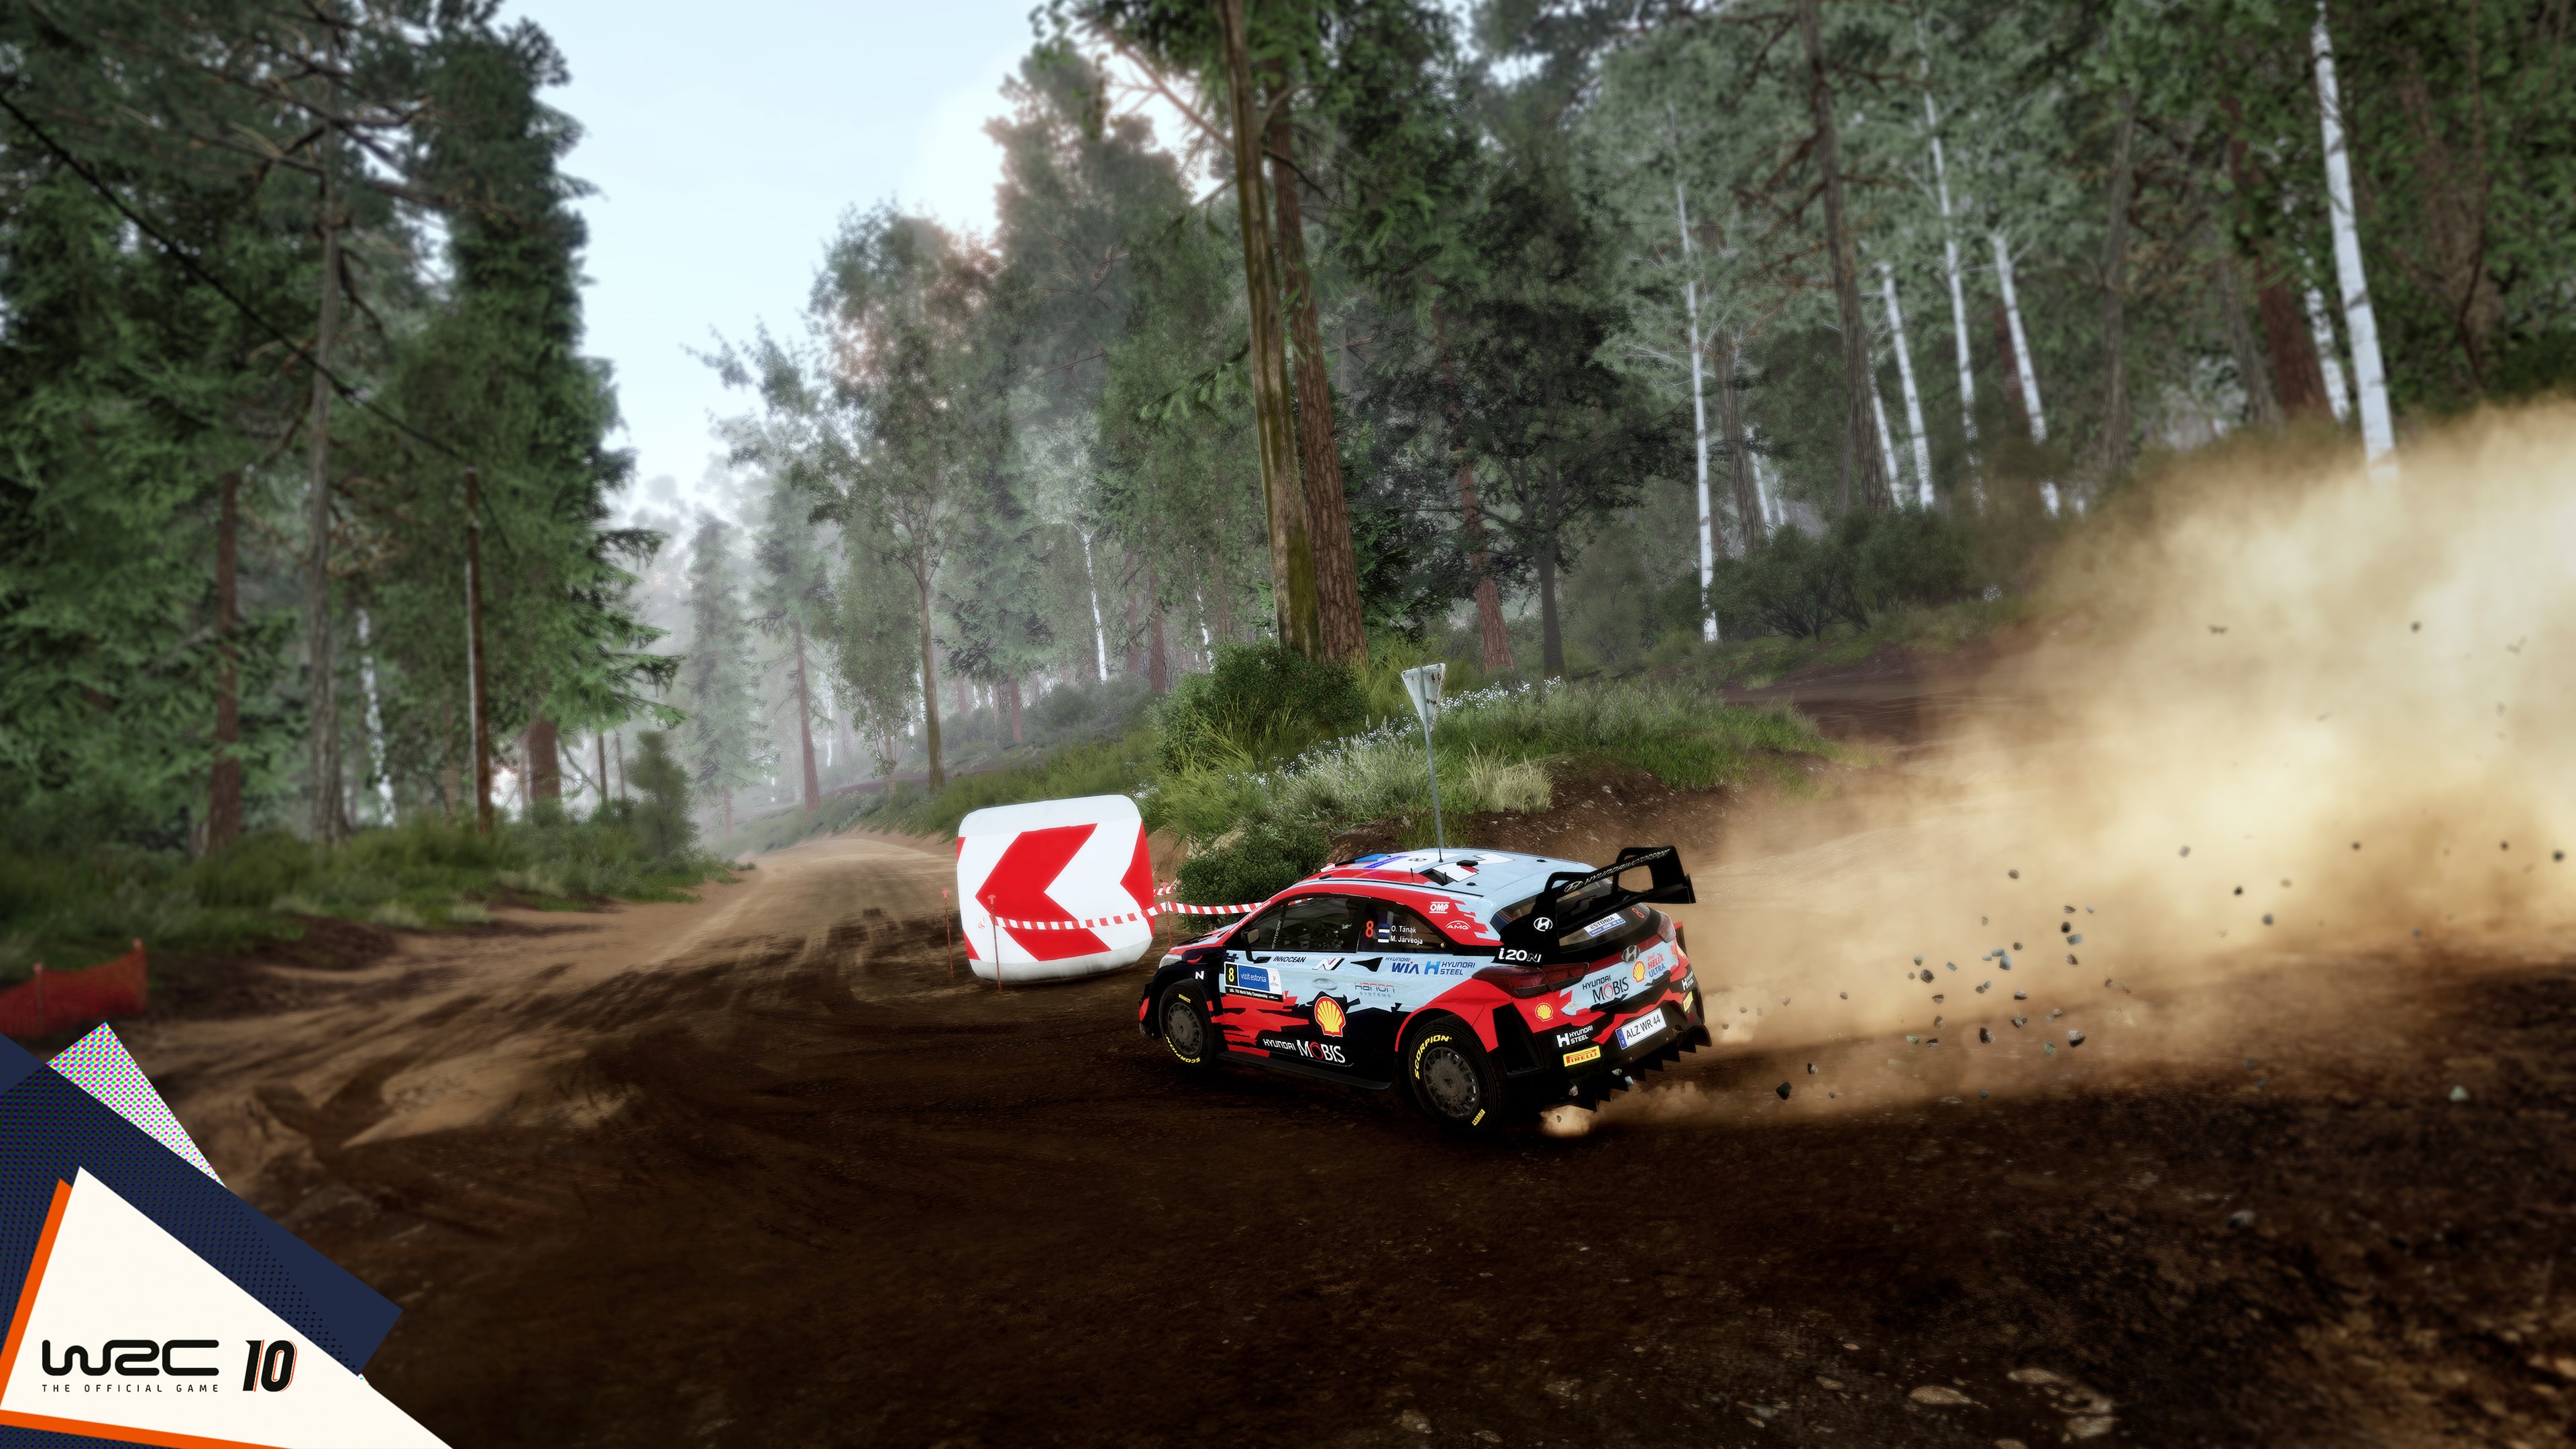 WRC 10 — Deluxe Edition PS4 & PS5 on PS5 PS4 — price history, screenshots,  discounts • USA